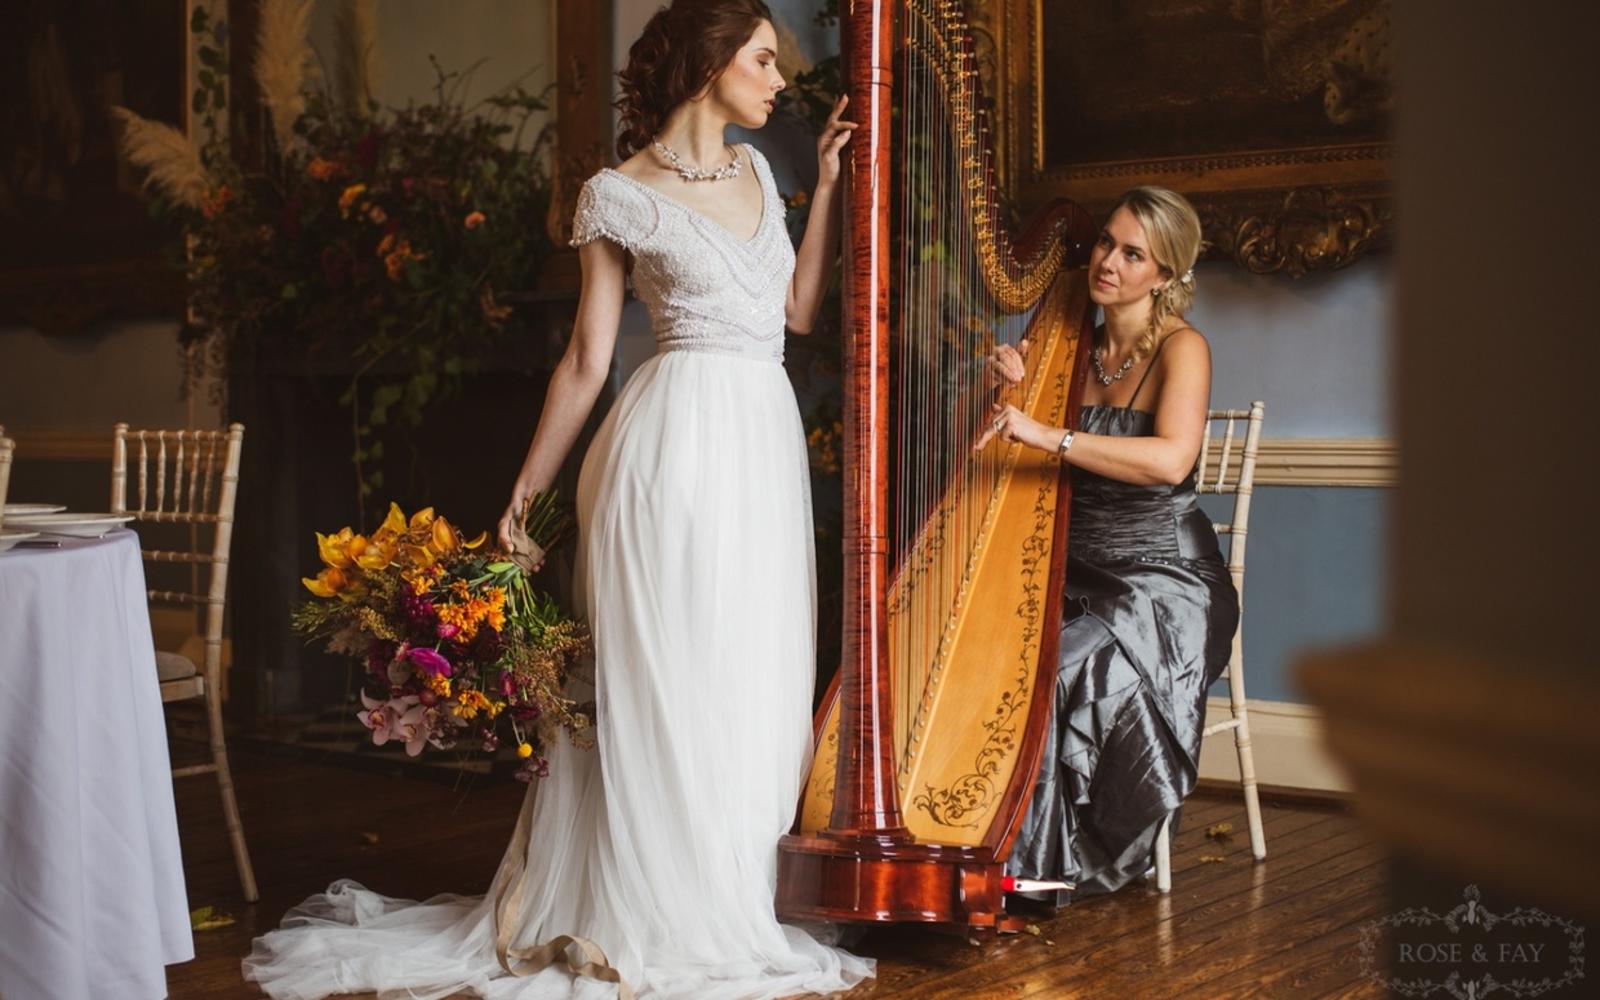 Styled Shot Avante Garde wedding venue Devizes Town Hall Whitewed Willoughby & Wolf Hibiscus & Hodge Pastel Designs classical whimsical autumnal rich harpist bride ideas